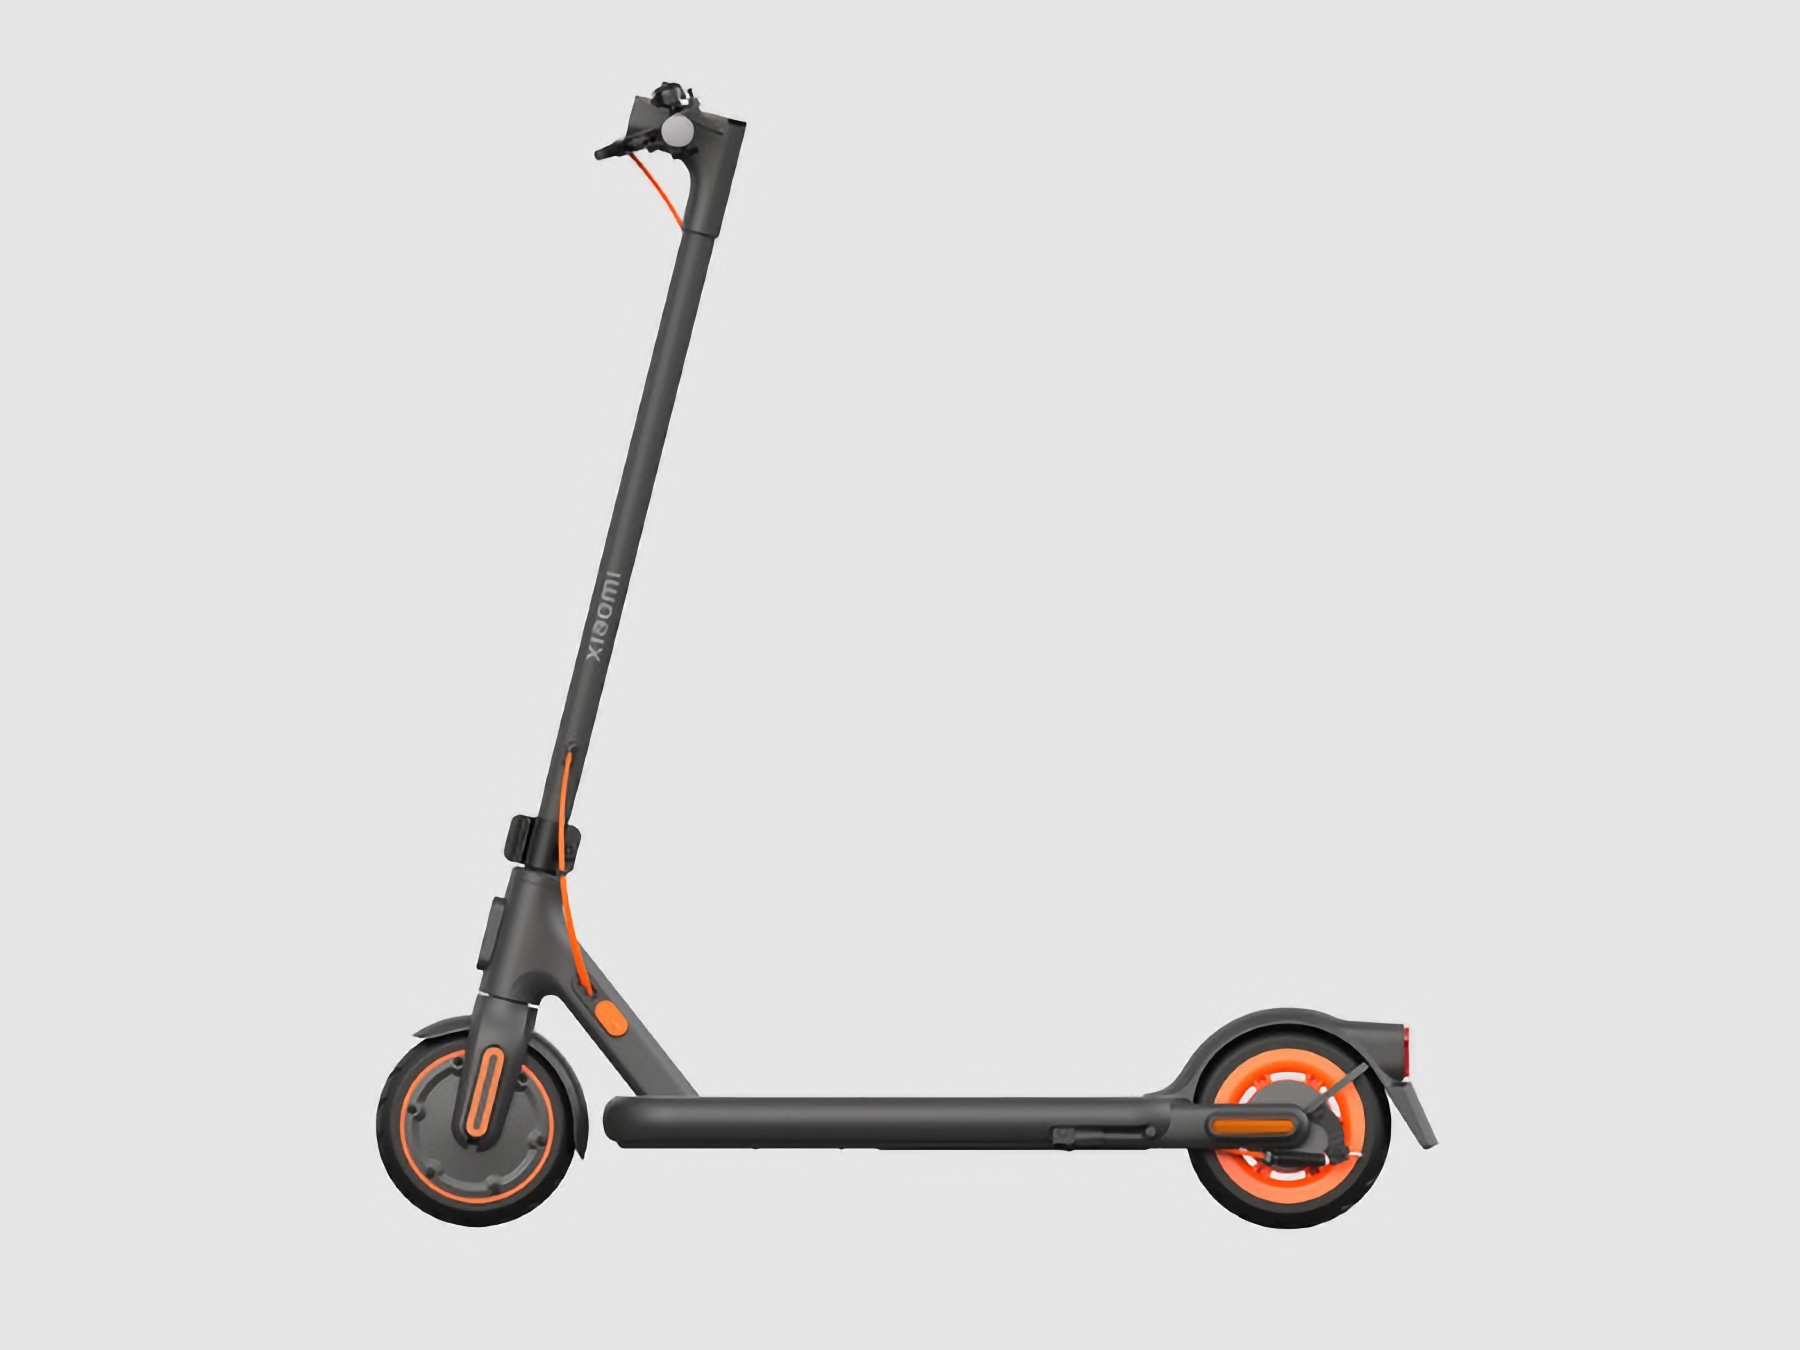 Xiaomi is preparing to launch the Electric Scooter 4 Go in Europe with a 250W motor and a range of 18km